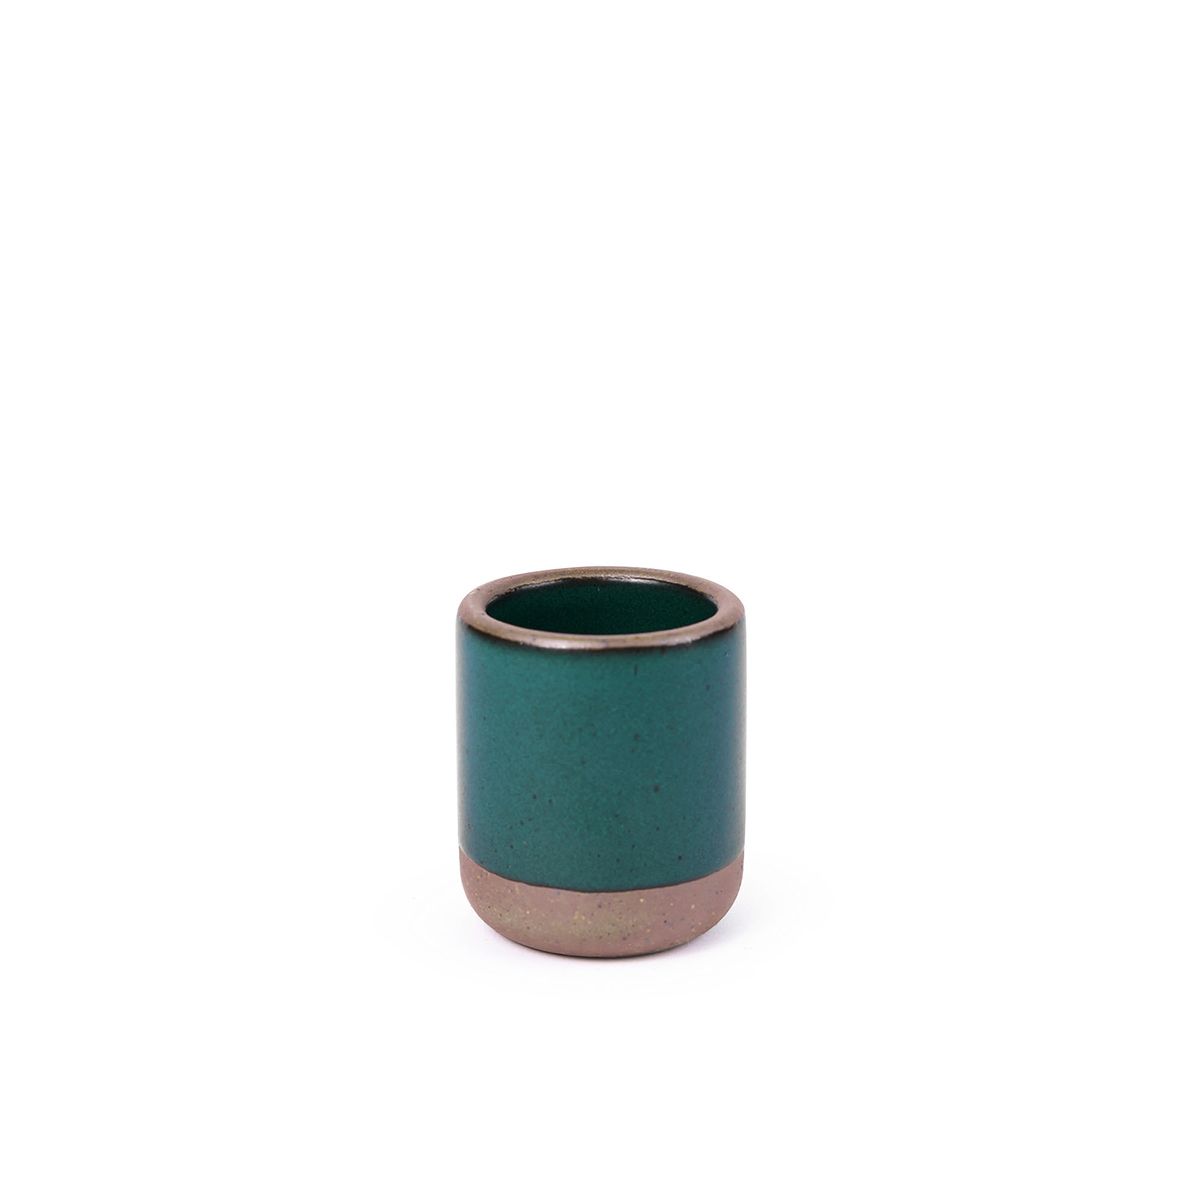 A small, short ceramic mug cup in a deep dark teal color featuring iron speckles and unglazed rim and bottom base.